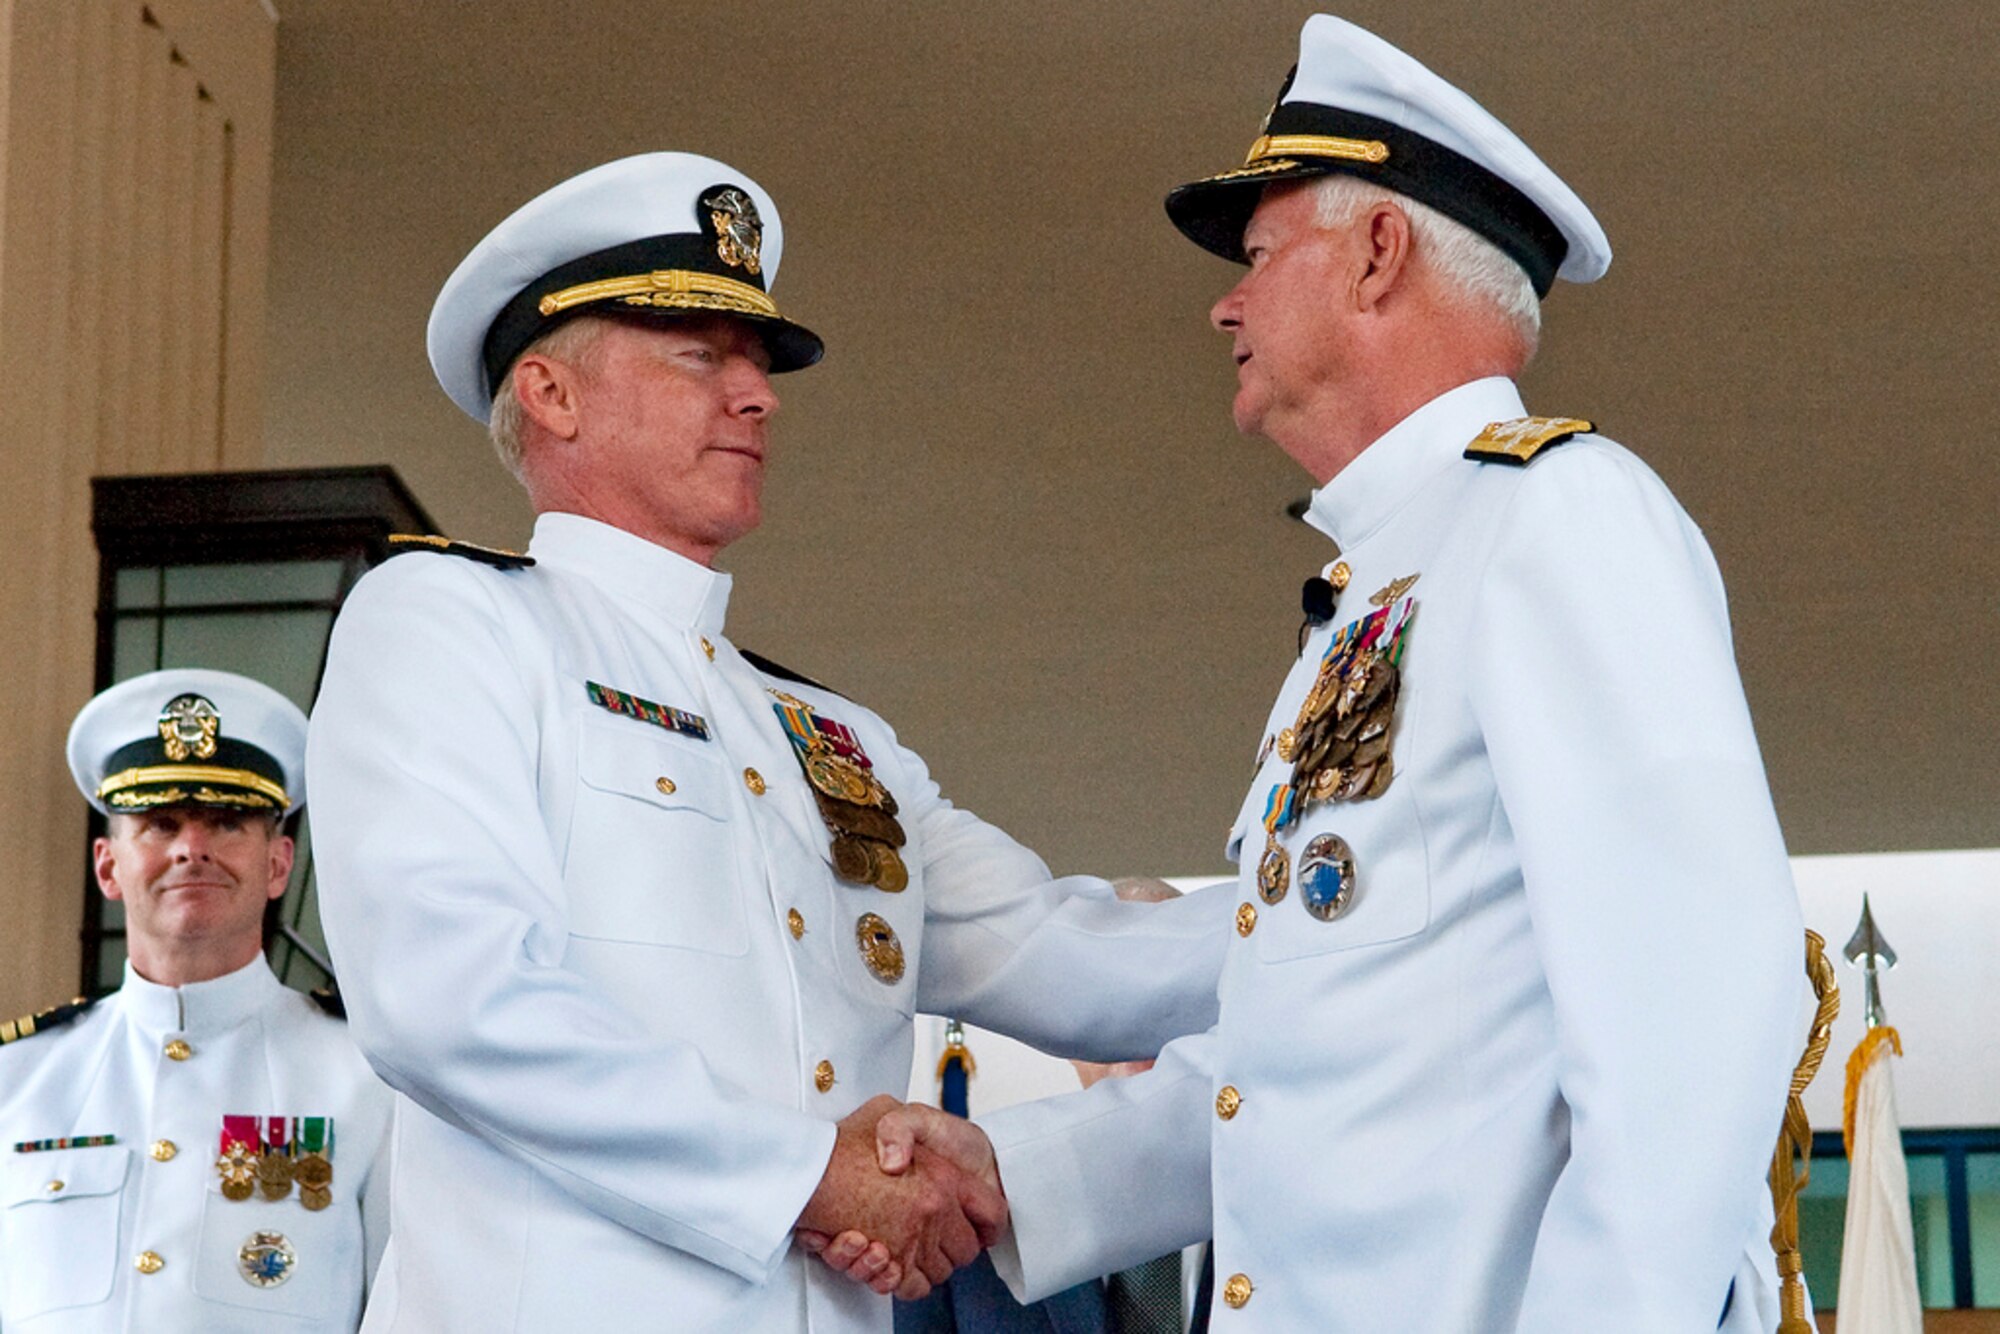 091019-N-0696M-269
U.S. Navy Adm. Timothy Keating, is relieved of duty by U.S. Navy Adm. Robert F. Willard at the PACOM change-of-command ceremony, Camp Smith, Hawaii, Oct. 19, 2009. (DoD photo by Mass Communication Specialist 1st Class Chad J. McNeeley/Released)